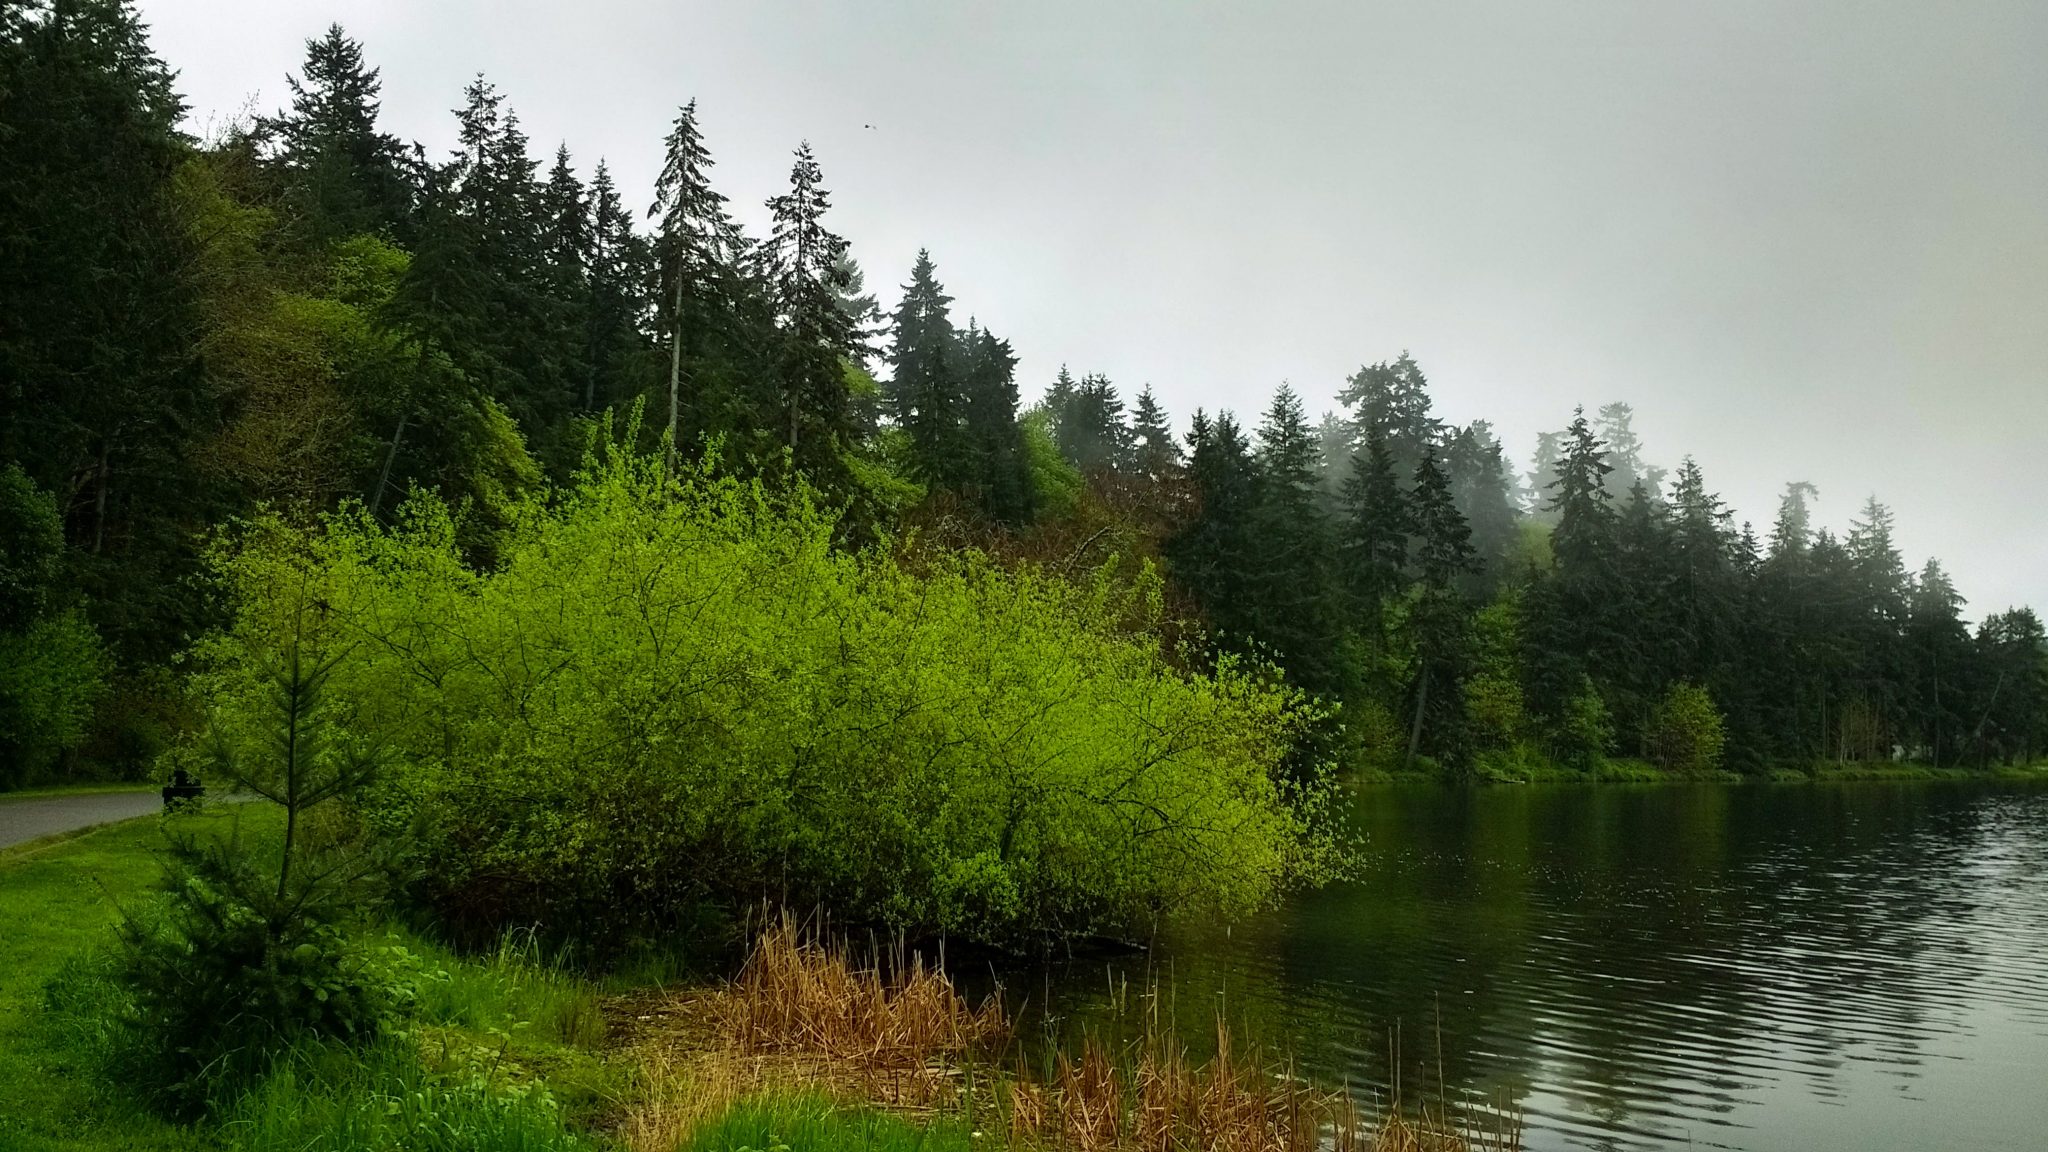 Walking and hiking are excellent outdoor activities in Seattle, including Seward Park. There are evergreen trees and green bushes along a path on a gray foggy day next to a lake